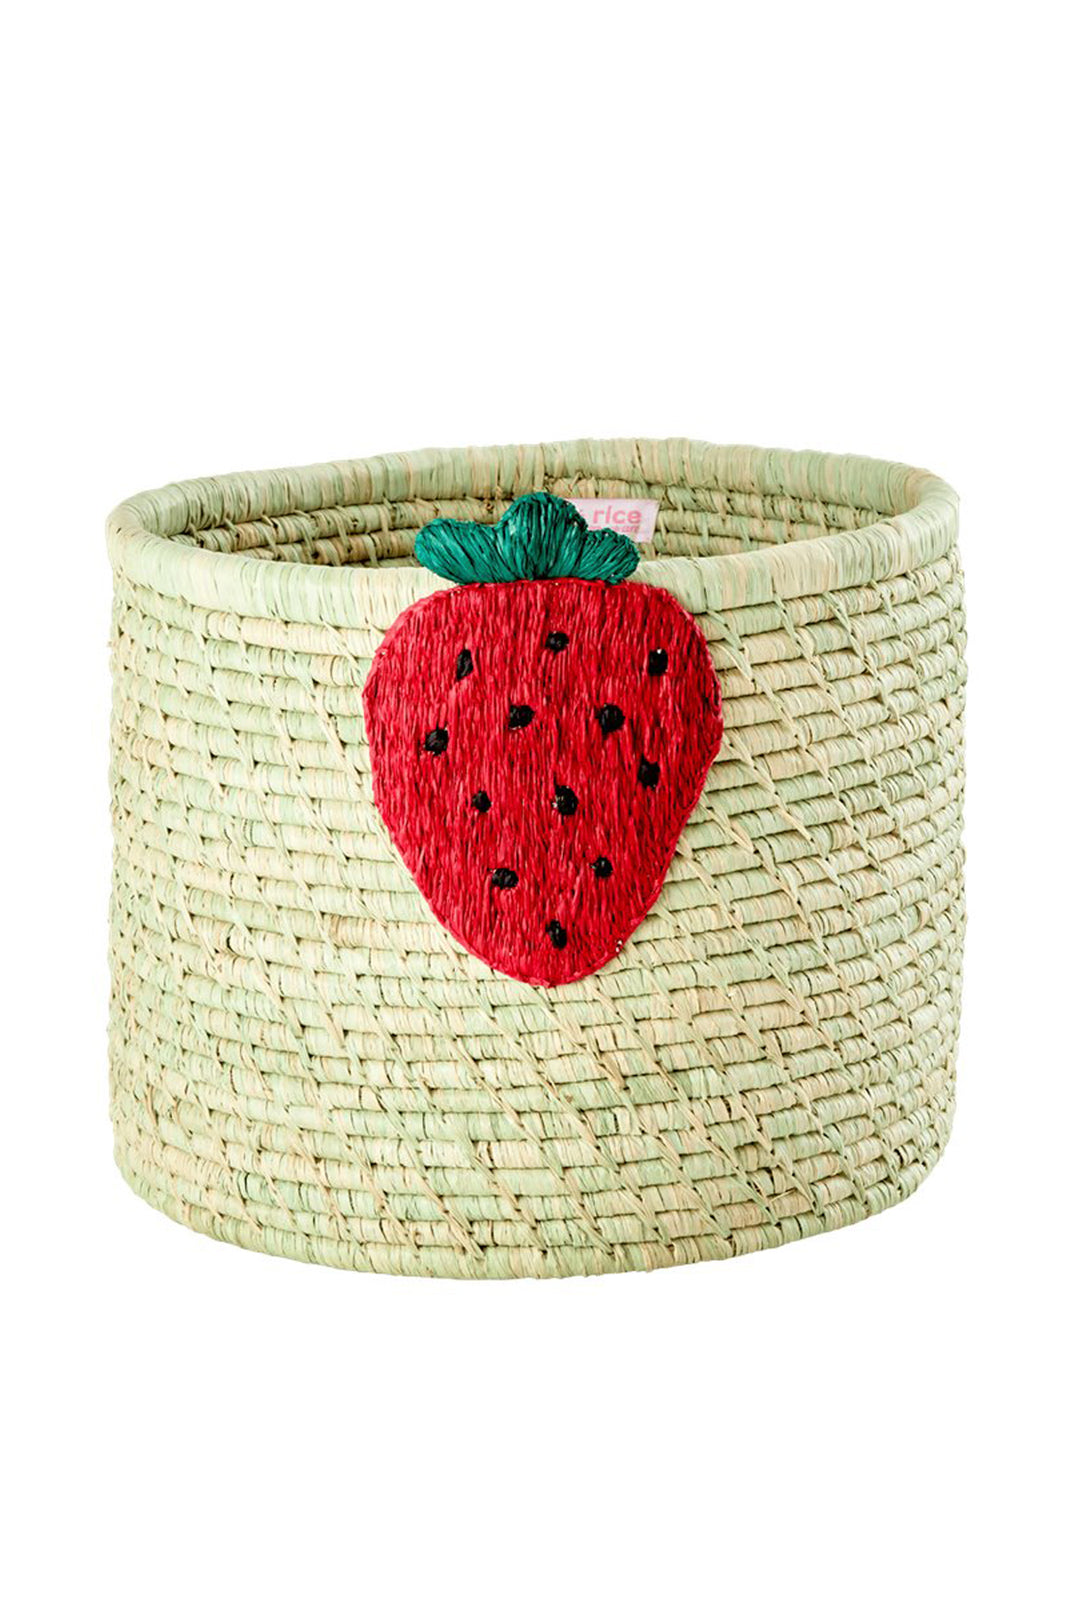 Raffia Round Basket in Green with Strawberry Embroidery